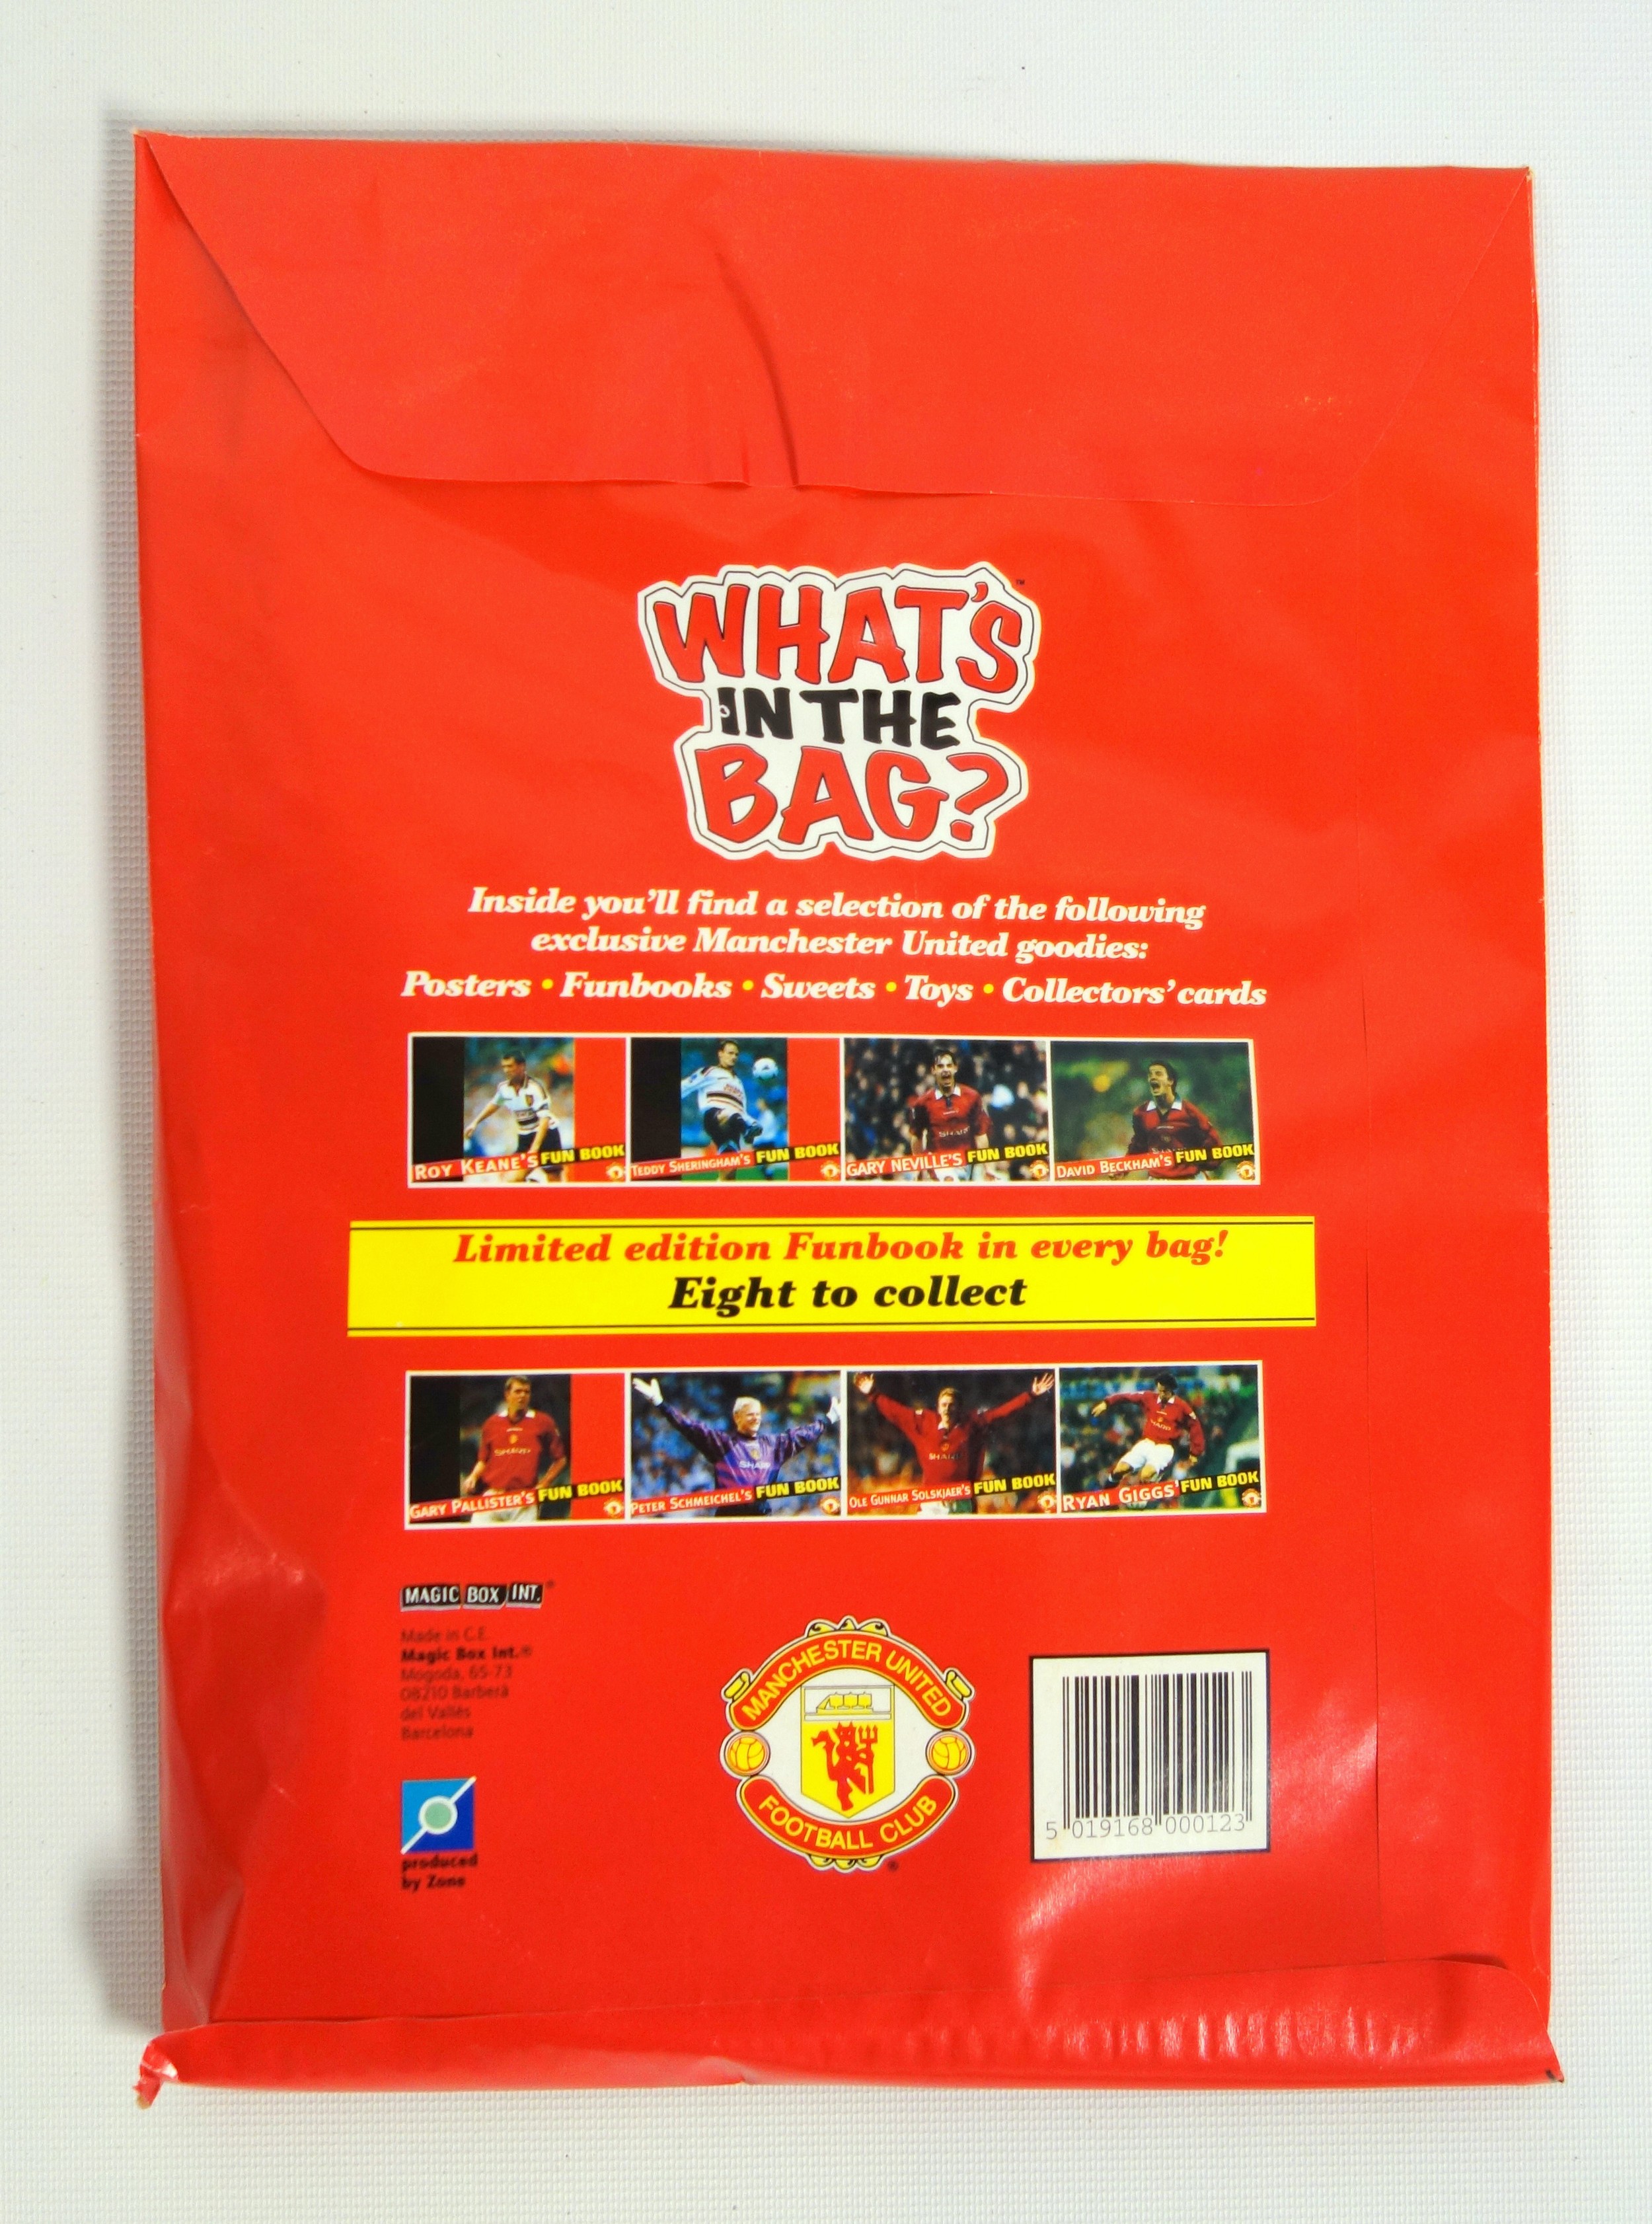 Four rare unopened Manchester United Football Club 'WHAT'S IN THE BAG?' Toys, surprises and official - Image 2 of 2